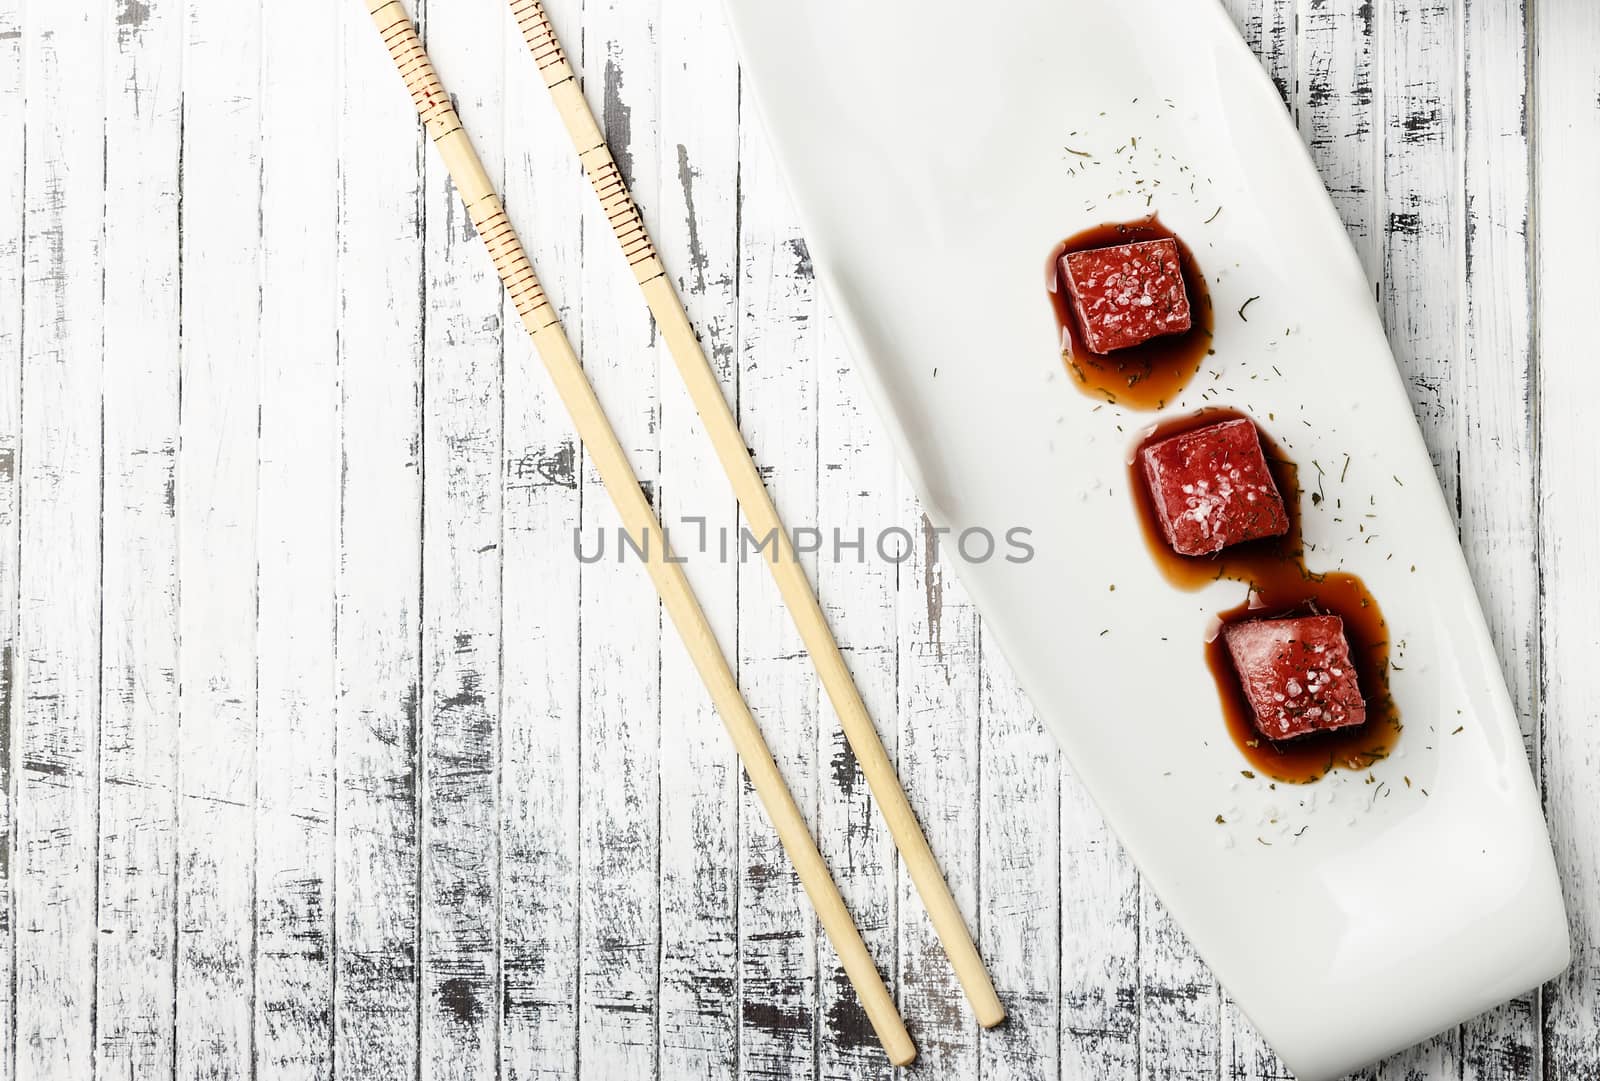 Tuna sashimi dipped in soy sauce,  thick salt and dill on old white wooden board with chopsticks. Viewed from above. Raw fish in traditional Japanese style. Horizontal image.